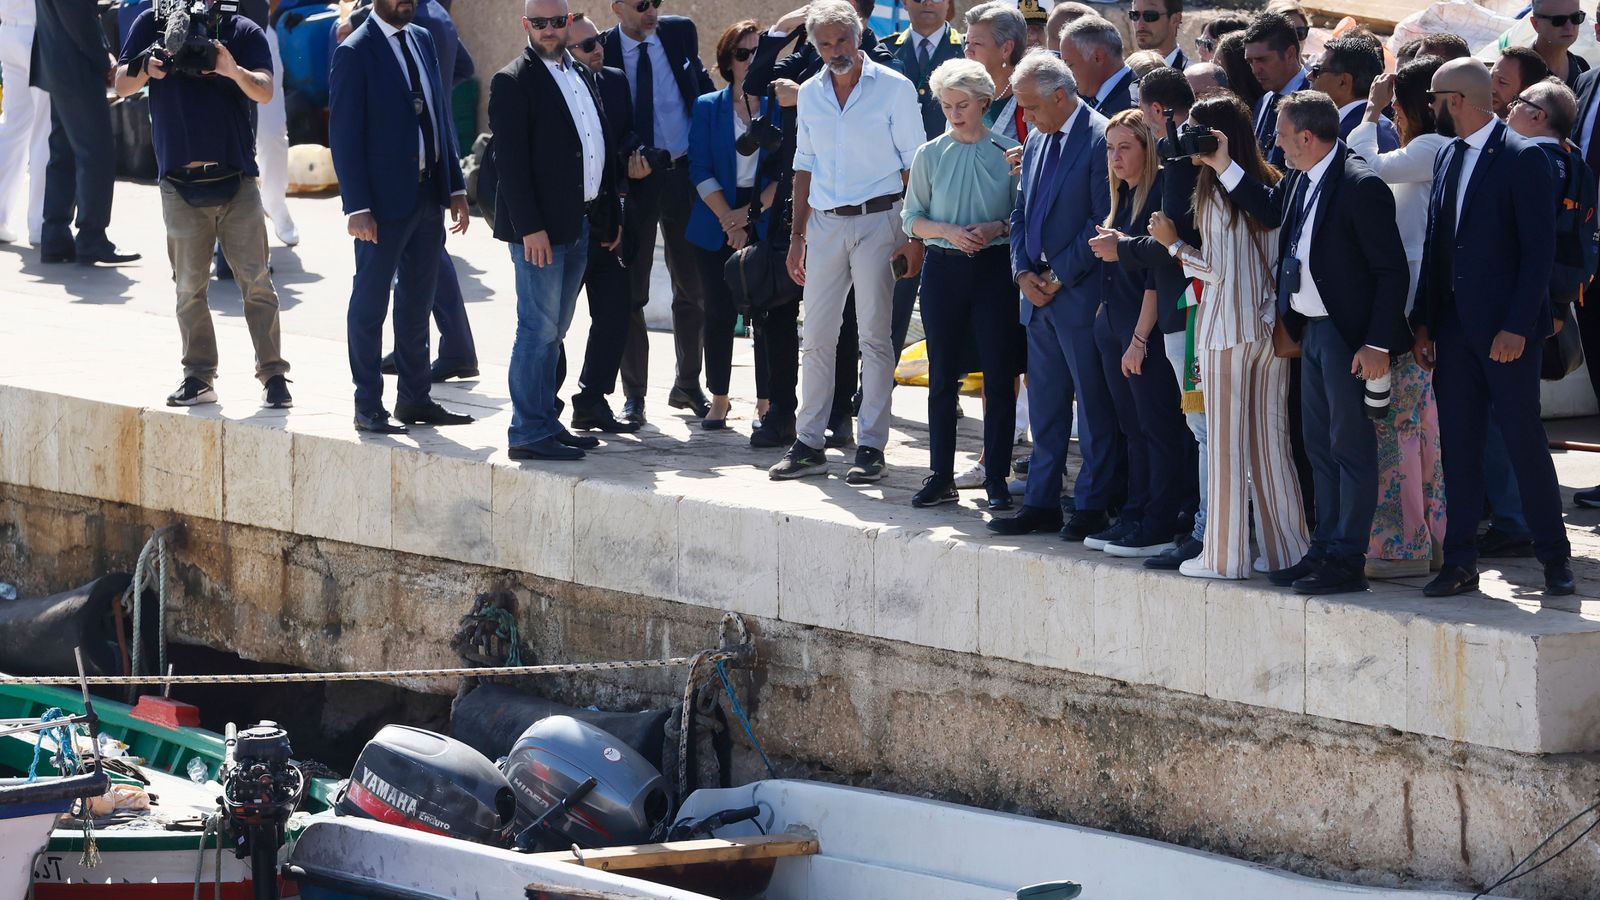 Lampedusa: Chaos at island epicentre of European migrant crisis 'sanitised' for leaders' visit